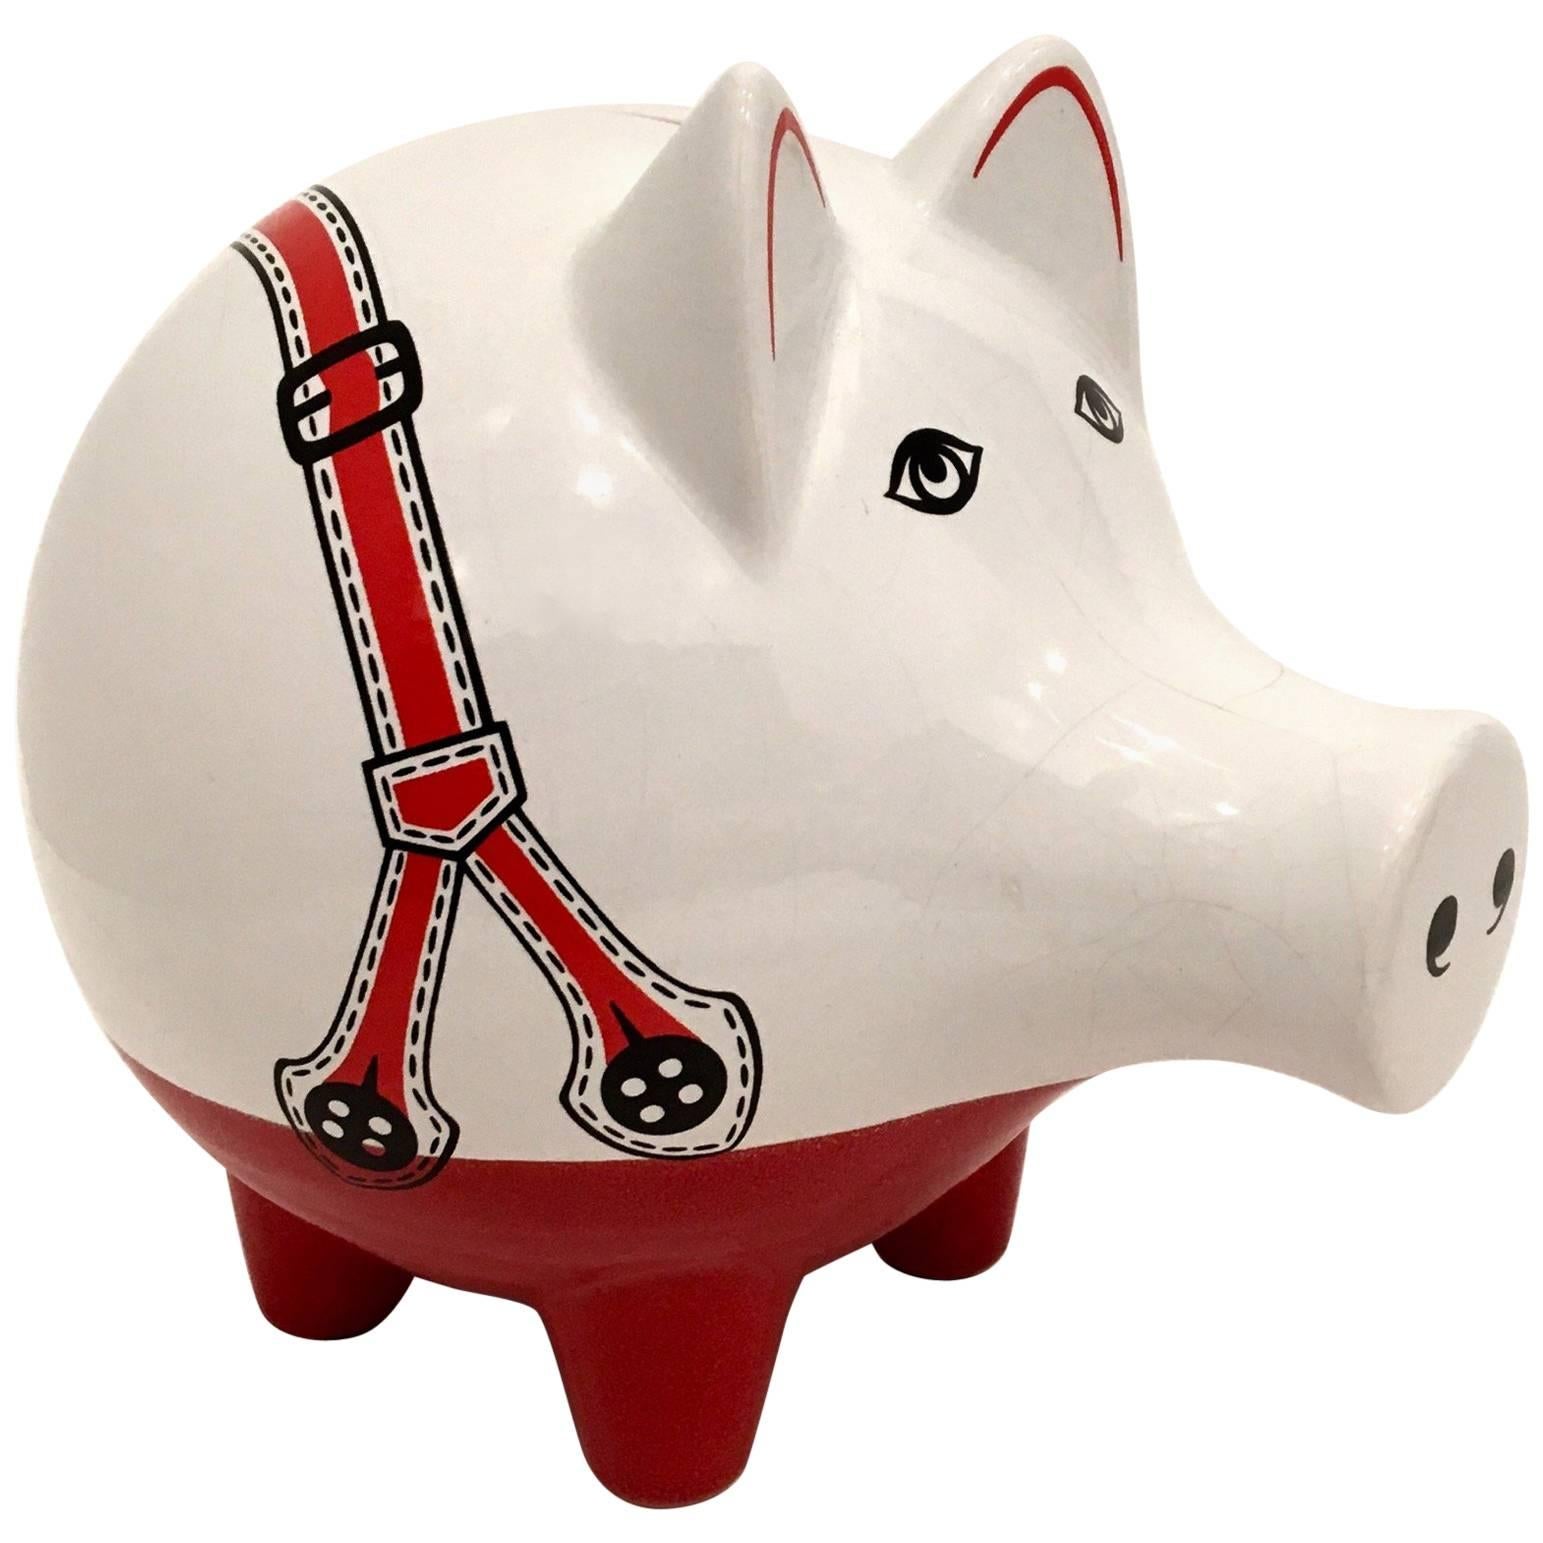 Whimsical Porcelain Piggy Bank/ Coin Saver by Waechtersbach West Germany